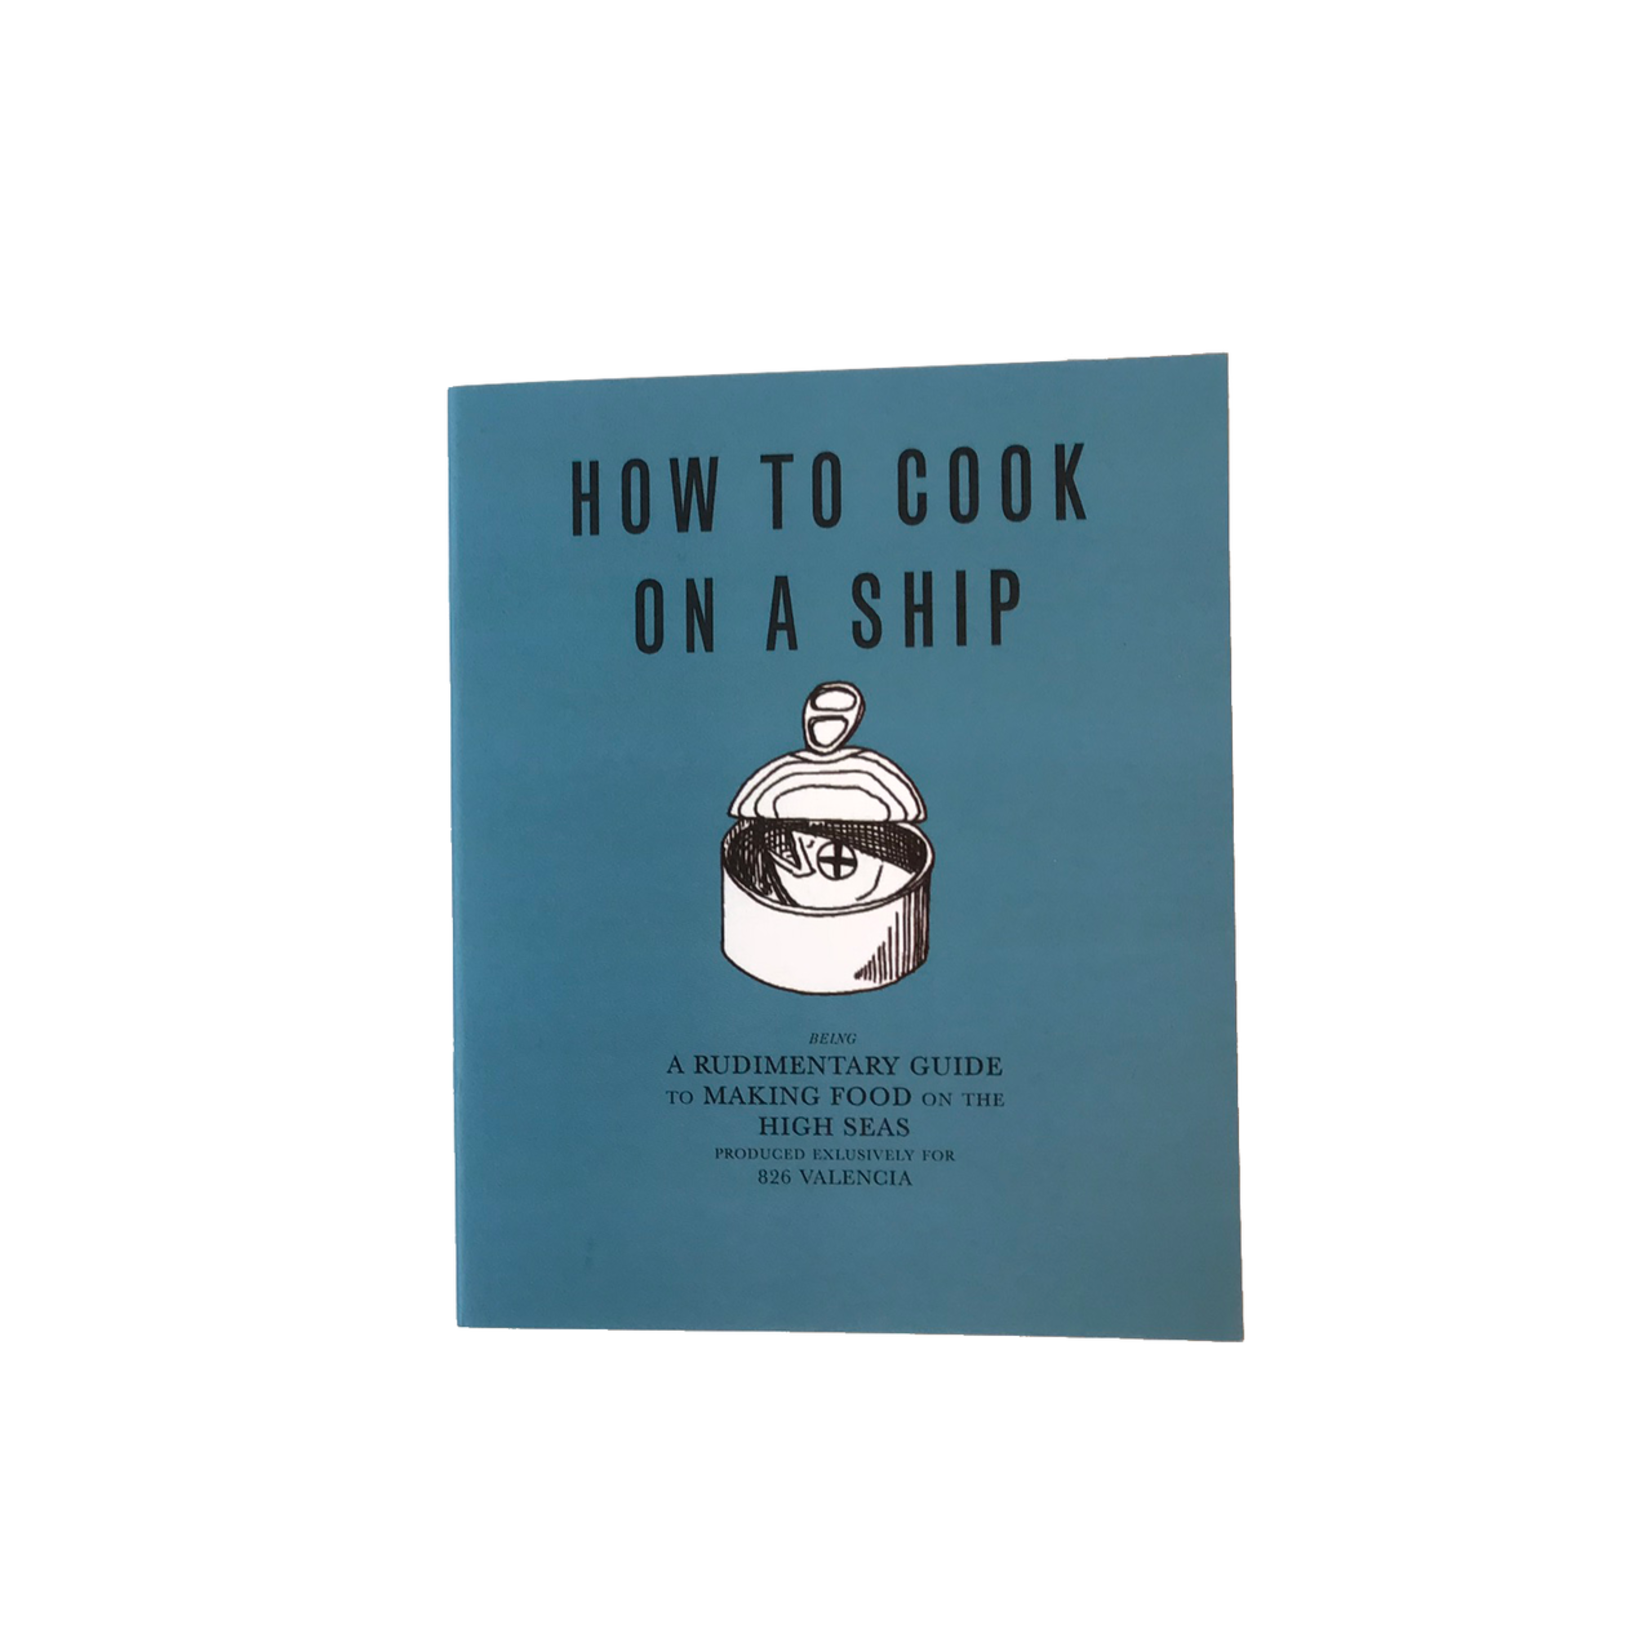 How to Cook on a Ship